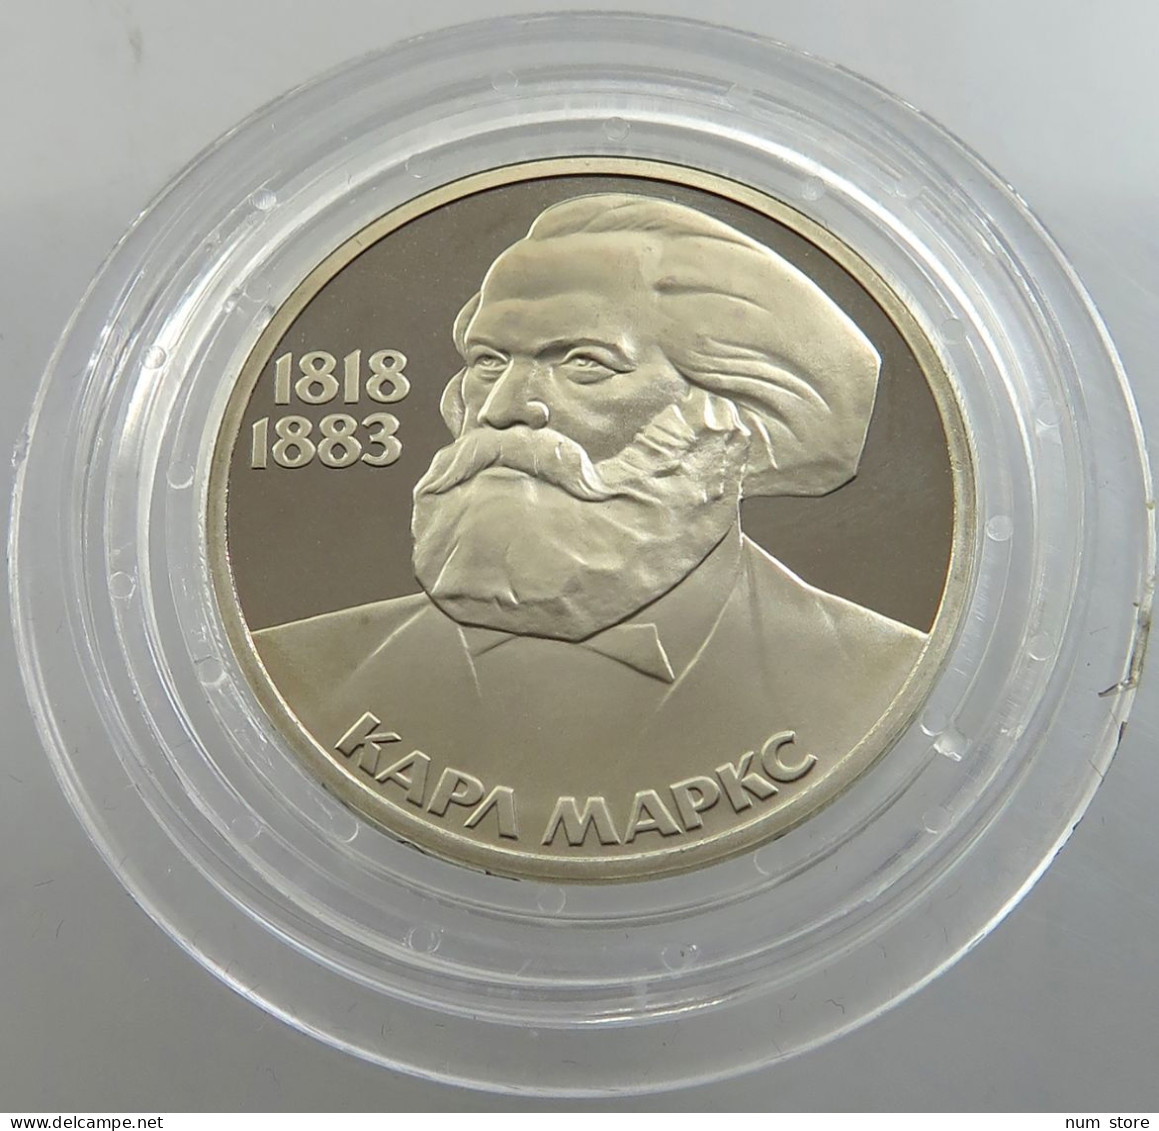 RUSSIA USSR 1 ROUBLE 1983 1988 MARX PROOF #sm14 0333 - Russland